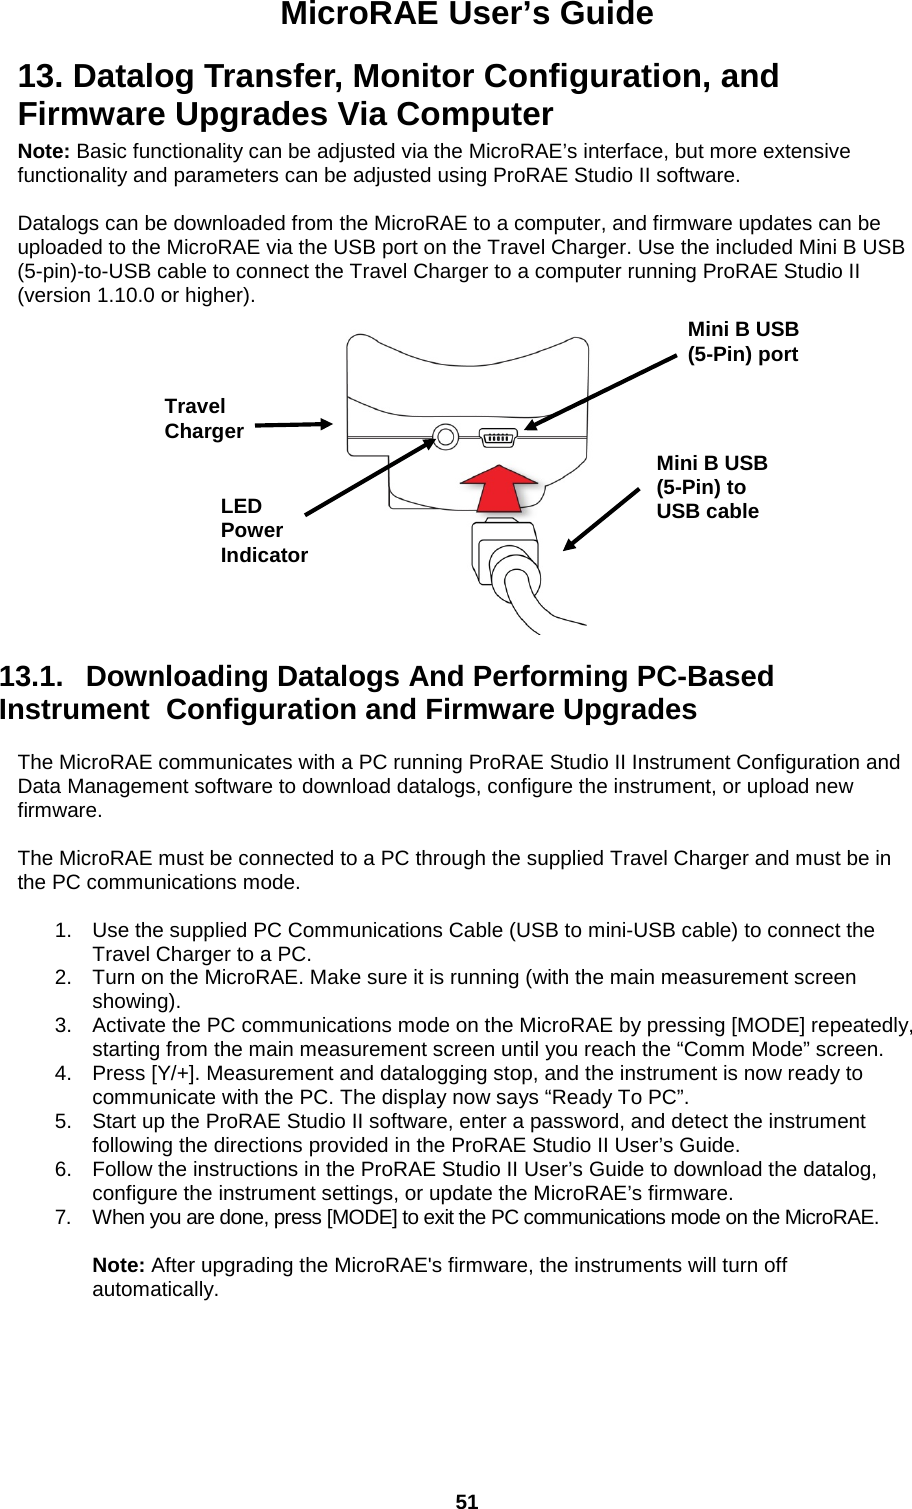 MicroRAE User’s Guide  51  13. Datalog Transfer, Monitor Configuration, and Firmware Upgrades Via Computer Note: Basic functionality can be adjusted via the MicroRAE’s interface, but more extensive functionality and parameters can be adjusted using ProRAE Studio II software.  Datalogs can be downloaded from the MicroRAE to a computer, and firmware updates can be uploaded to the MicroRAE via the USB port on the Travel Charger. Use the included Mini B USB (5-pin)-to-USB cable to connect the Travel Charger to a computer running ProRAE Studio II (version 1.10.0 or higher).    13.1.   Downloading Datalogs And Performing PC-Based Instrument  Configuration and Firmware Upgrades  The MicroRAE communicates with a PC running ProRAE Studio II Instrument Configuration and Data Management software to download datalogs, configure the instrument, or upload new firmware.   The MicroRAE must be connected to a PC through the supplied Travel Charger and must be in the PC communications mode.  1. Use the supplied PC Communications Cable (USB to mini-USB cable) to connect the Travel Charger to a PC. 2. Turn on the MicroRAE. Make sure it is running (with the main measurement screen showing). 3. Activate the PC communications mode on the MicroRAE by pressing [MODE] repeatedly, starting from the main measurement screen until you reach the “Comm Mode” screen. 4. Press [Y/+]. Measurement and datalogging stop, and the instrument is now ready to communicate with the PC. The display now says “Ready To PC”. 5. Start up the ProRAE Studio II software, enter a password, and detect the instrument following the directions provided in the ProRAE Studio II User’s Guide. 6. Follow the instructions in the ProRAE Studio II User’s Guide to download the datalog, configure the instrument settings, or update the MicroRAE’s firmware. 7. When you are done, press [MODE] to exit the PC communications mode on the MicroRAE.   Note: After upgrading the MicroRAE&apos;s firmware, the instruments will turn off automatically. Mini B USB (5-Pin) to USB cable Travel Charger Mini B USB (5-Pin) port LED Power Indicator 